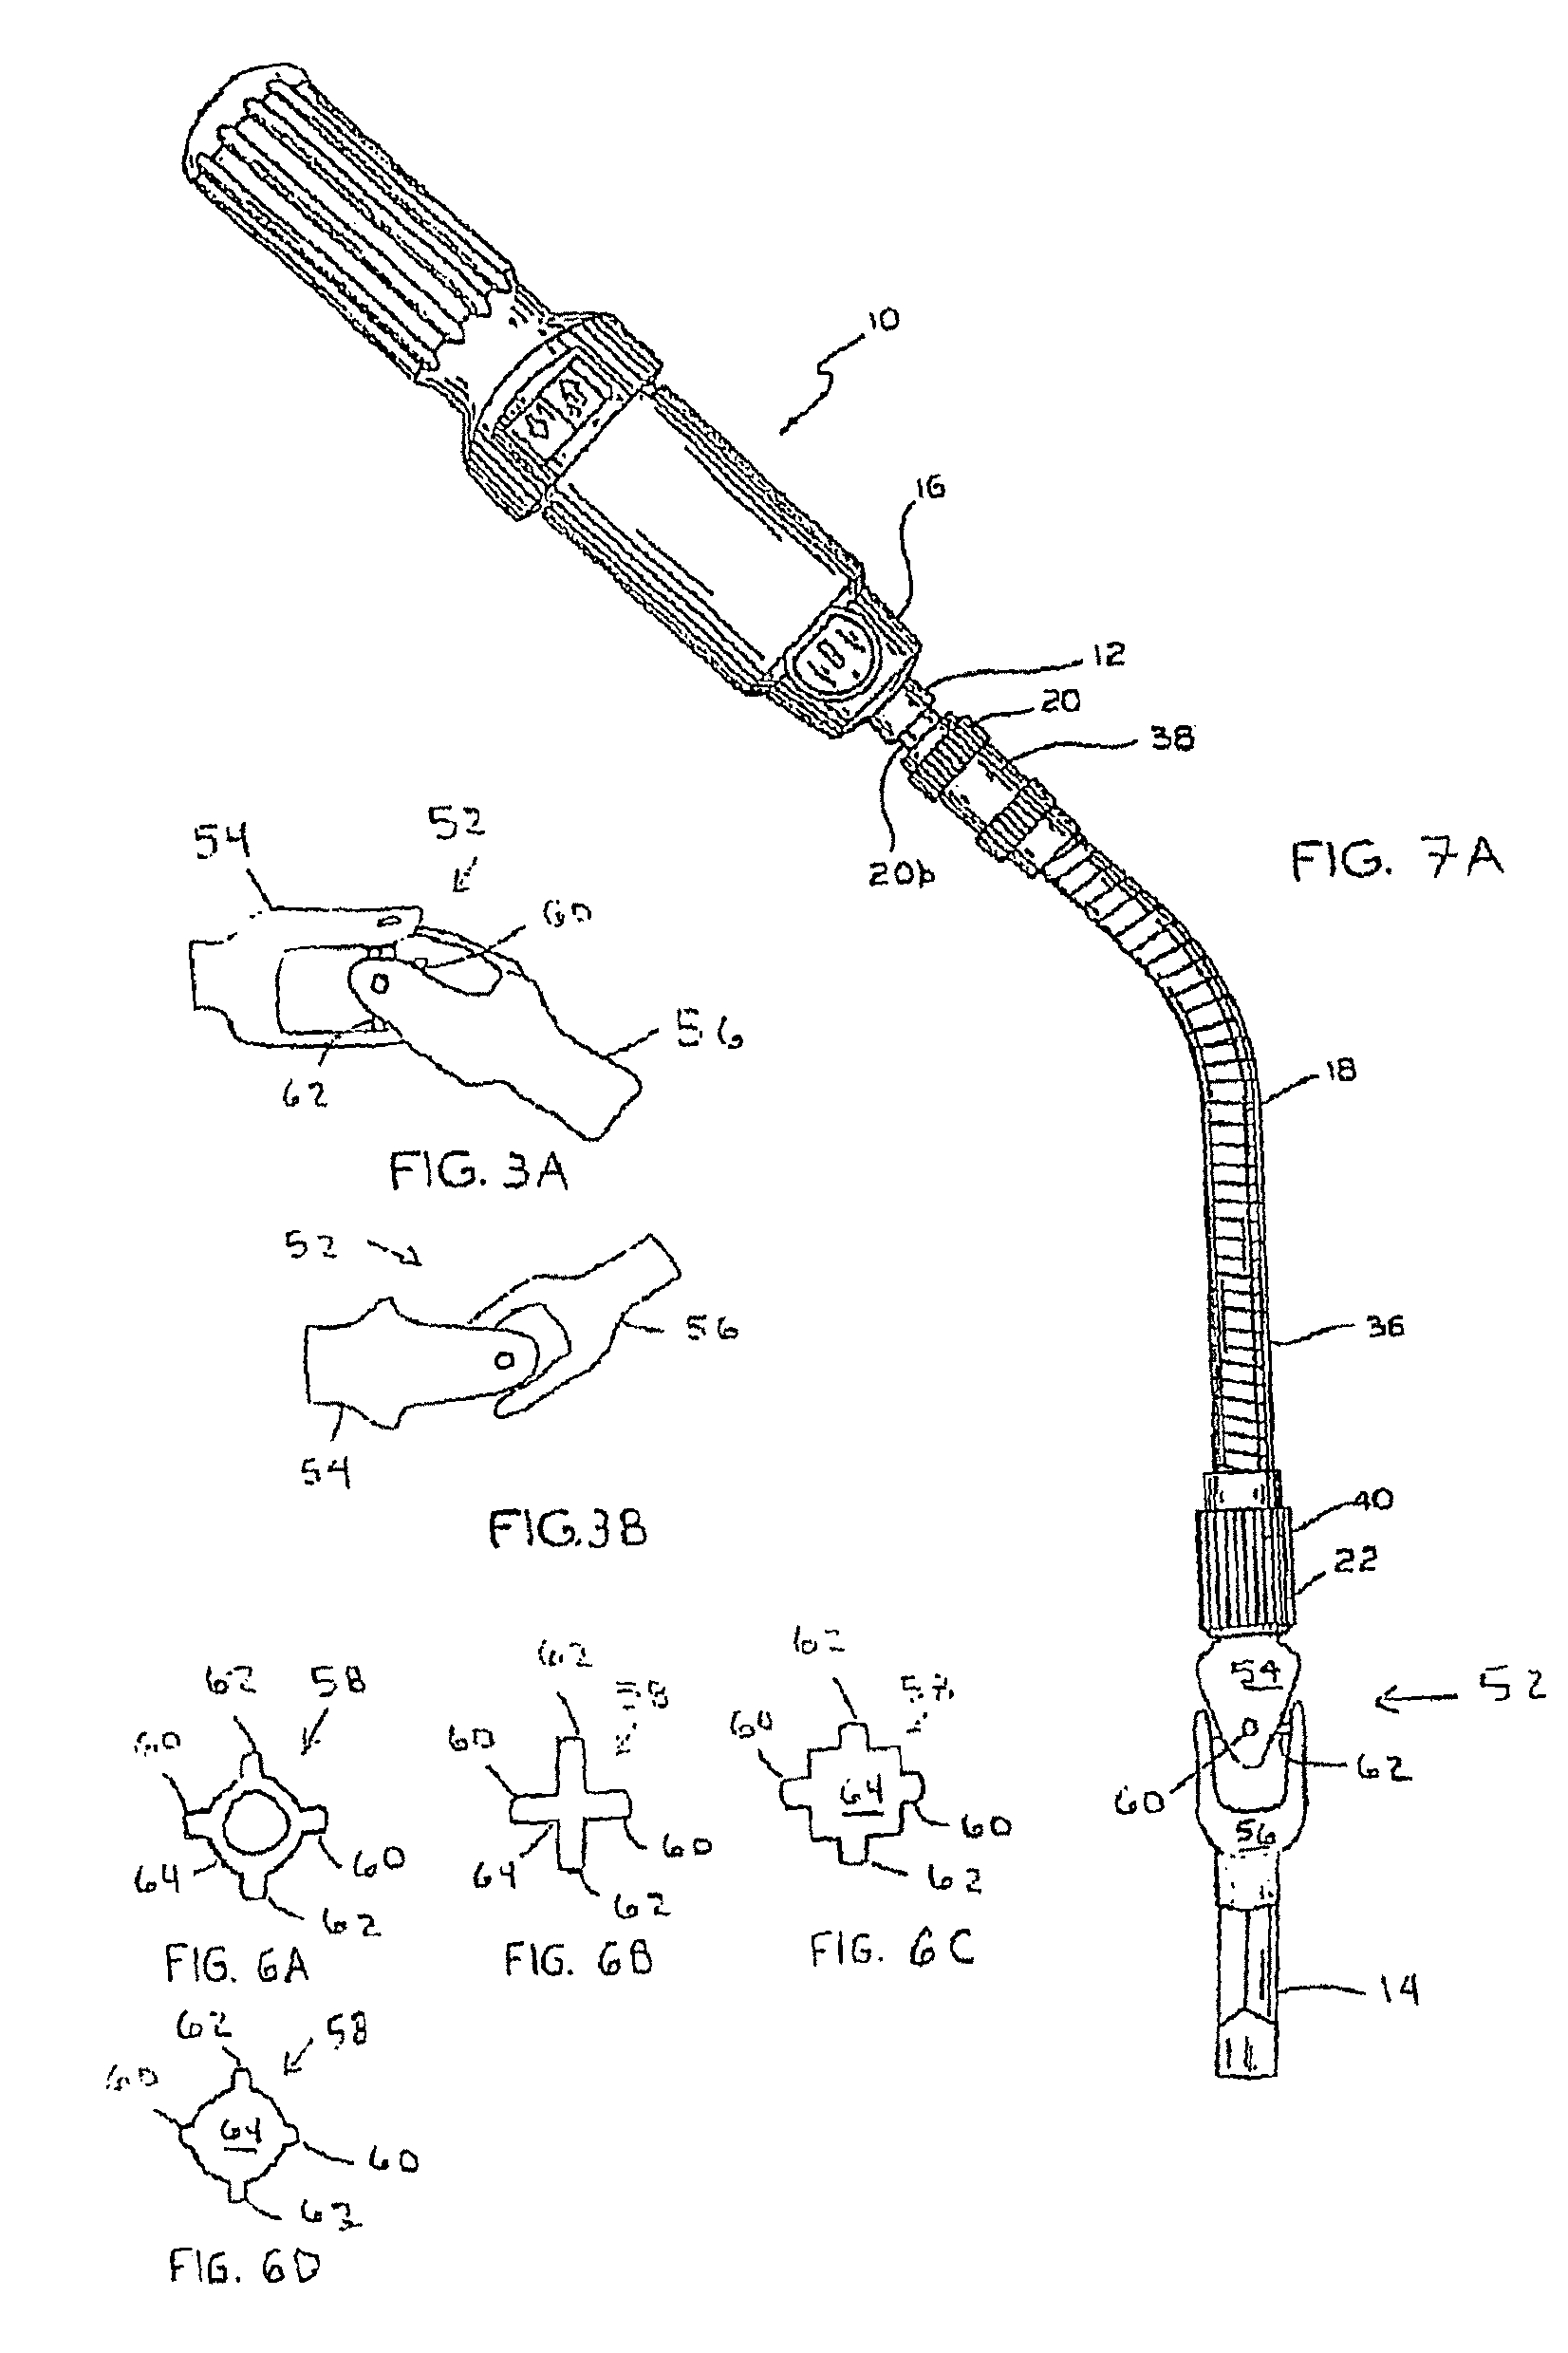 Extension shaft for hold a tool for rotary driven motion